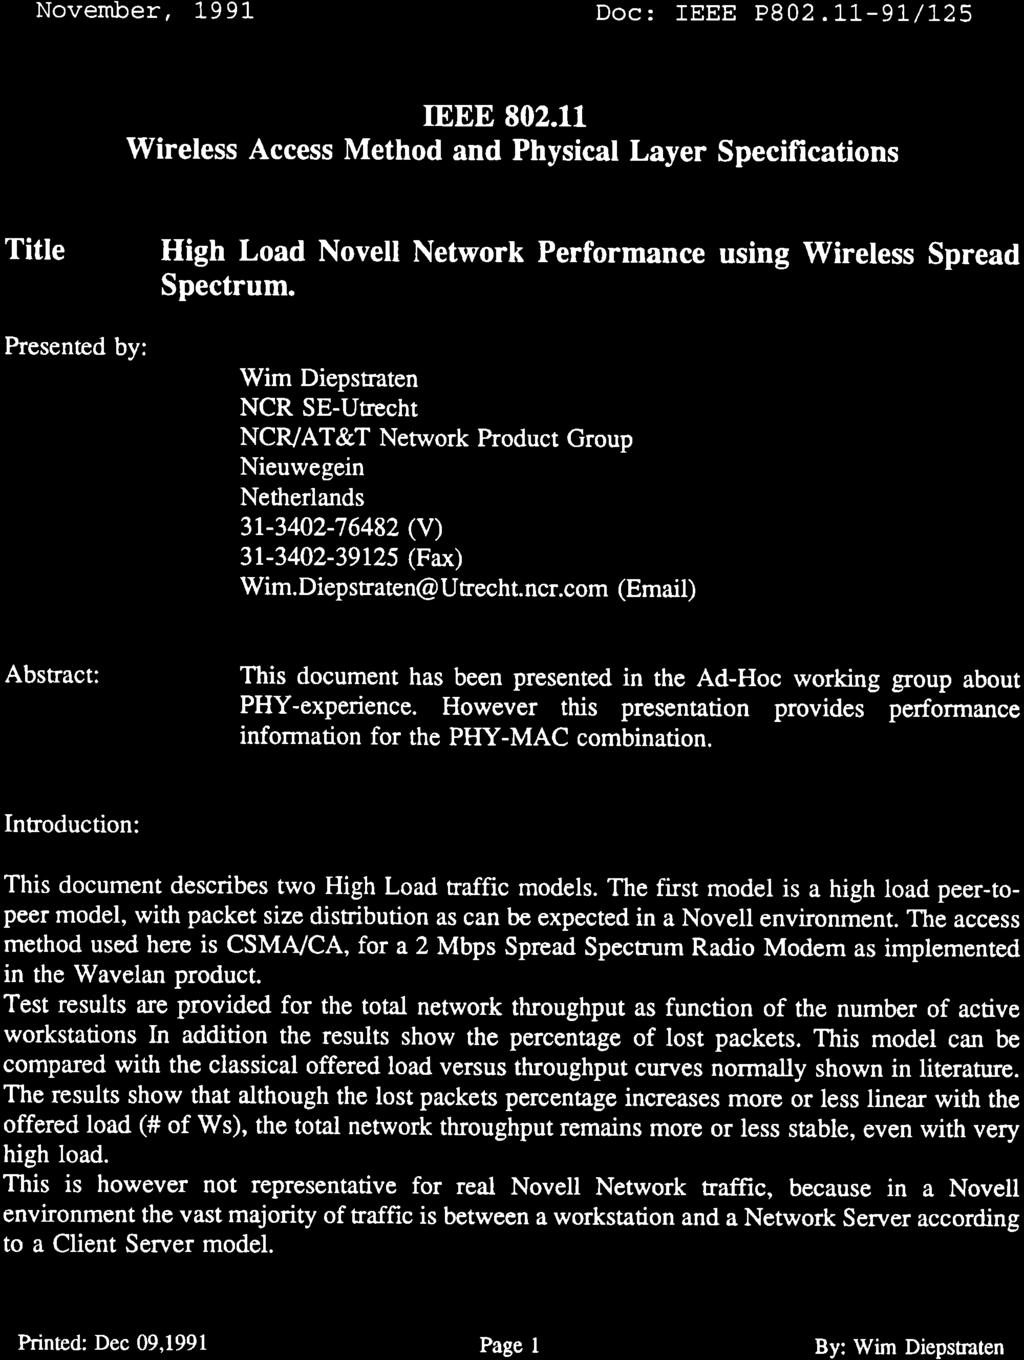 Doc: IEEE P802.11-91/12S IEEE 802.11 Wireless Access Method and Physical Layer Specifications Title: Presented by: High Load Novell Network Performance using Wireless Spread Spectrum.